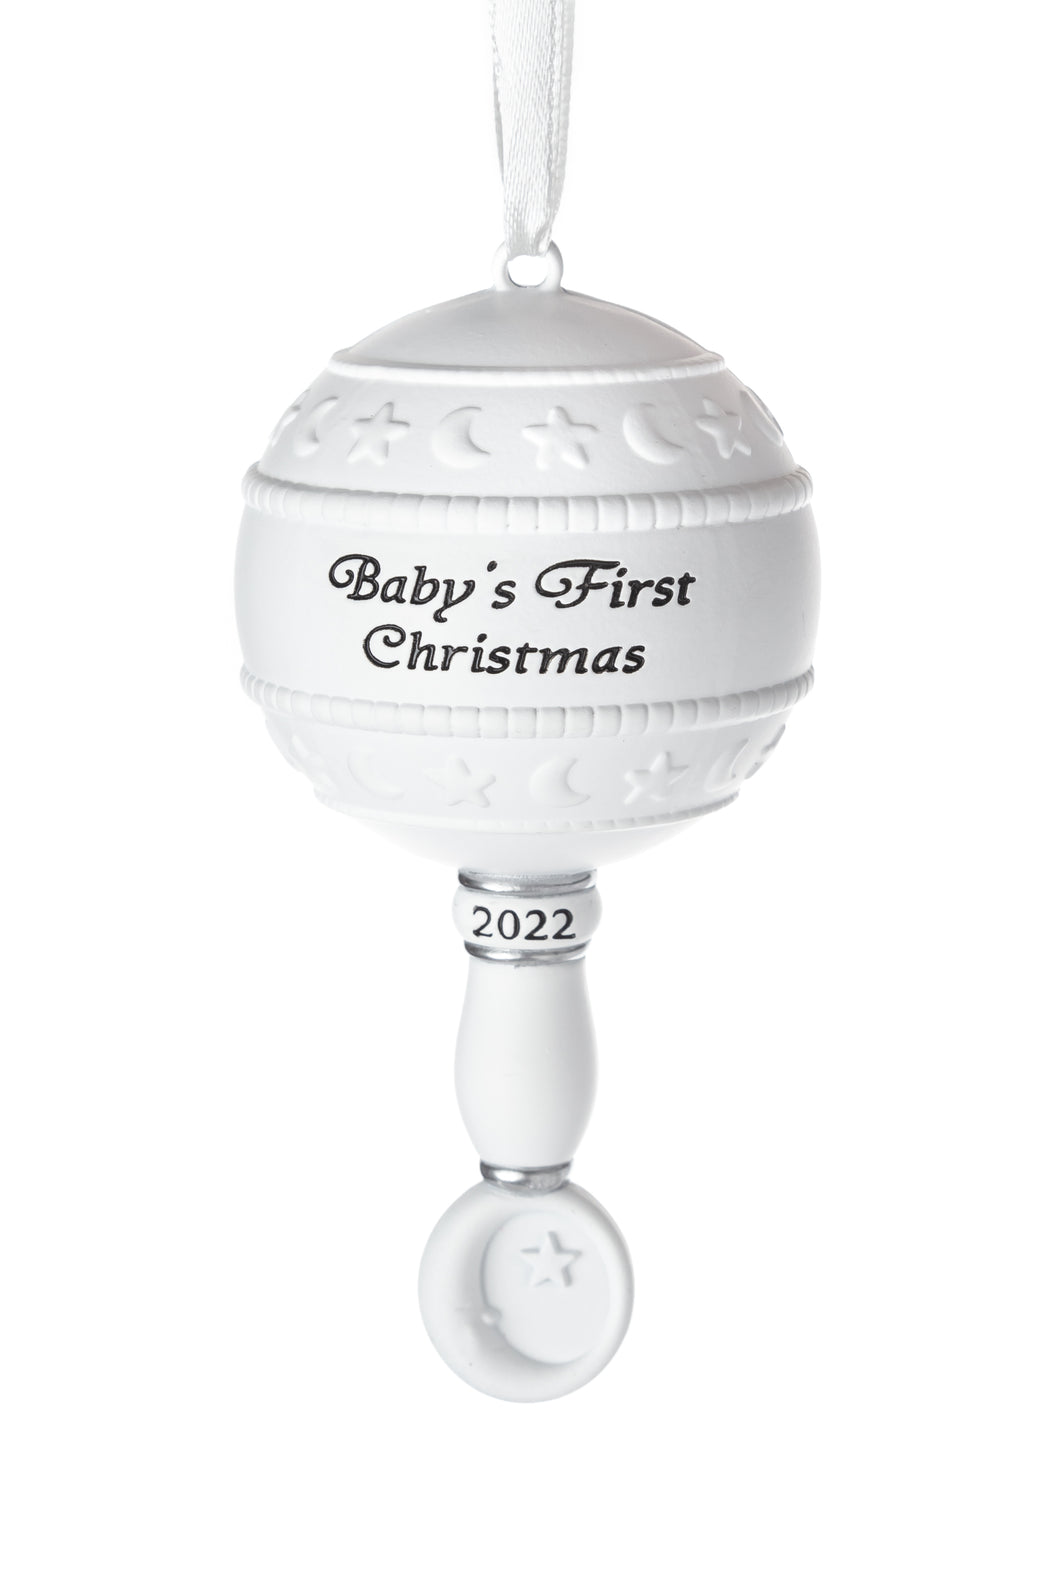 Christmas Ornament 2022 - White Rattle Baby First Christmas Ornament 2022 - 1st Christmas Baby Ornament 2022 - Babies First Christmas Ornament - Boy Girl Keepsake Ornament 2022